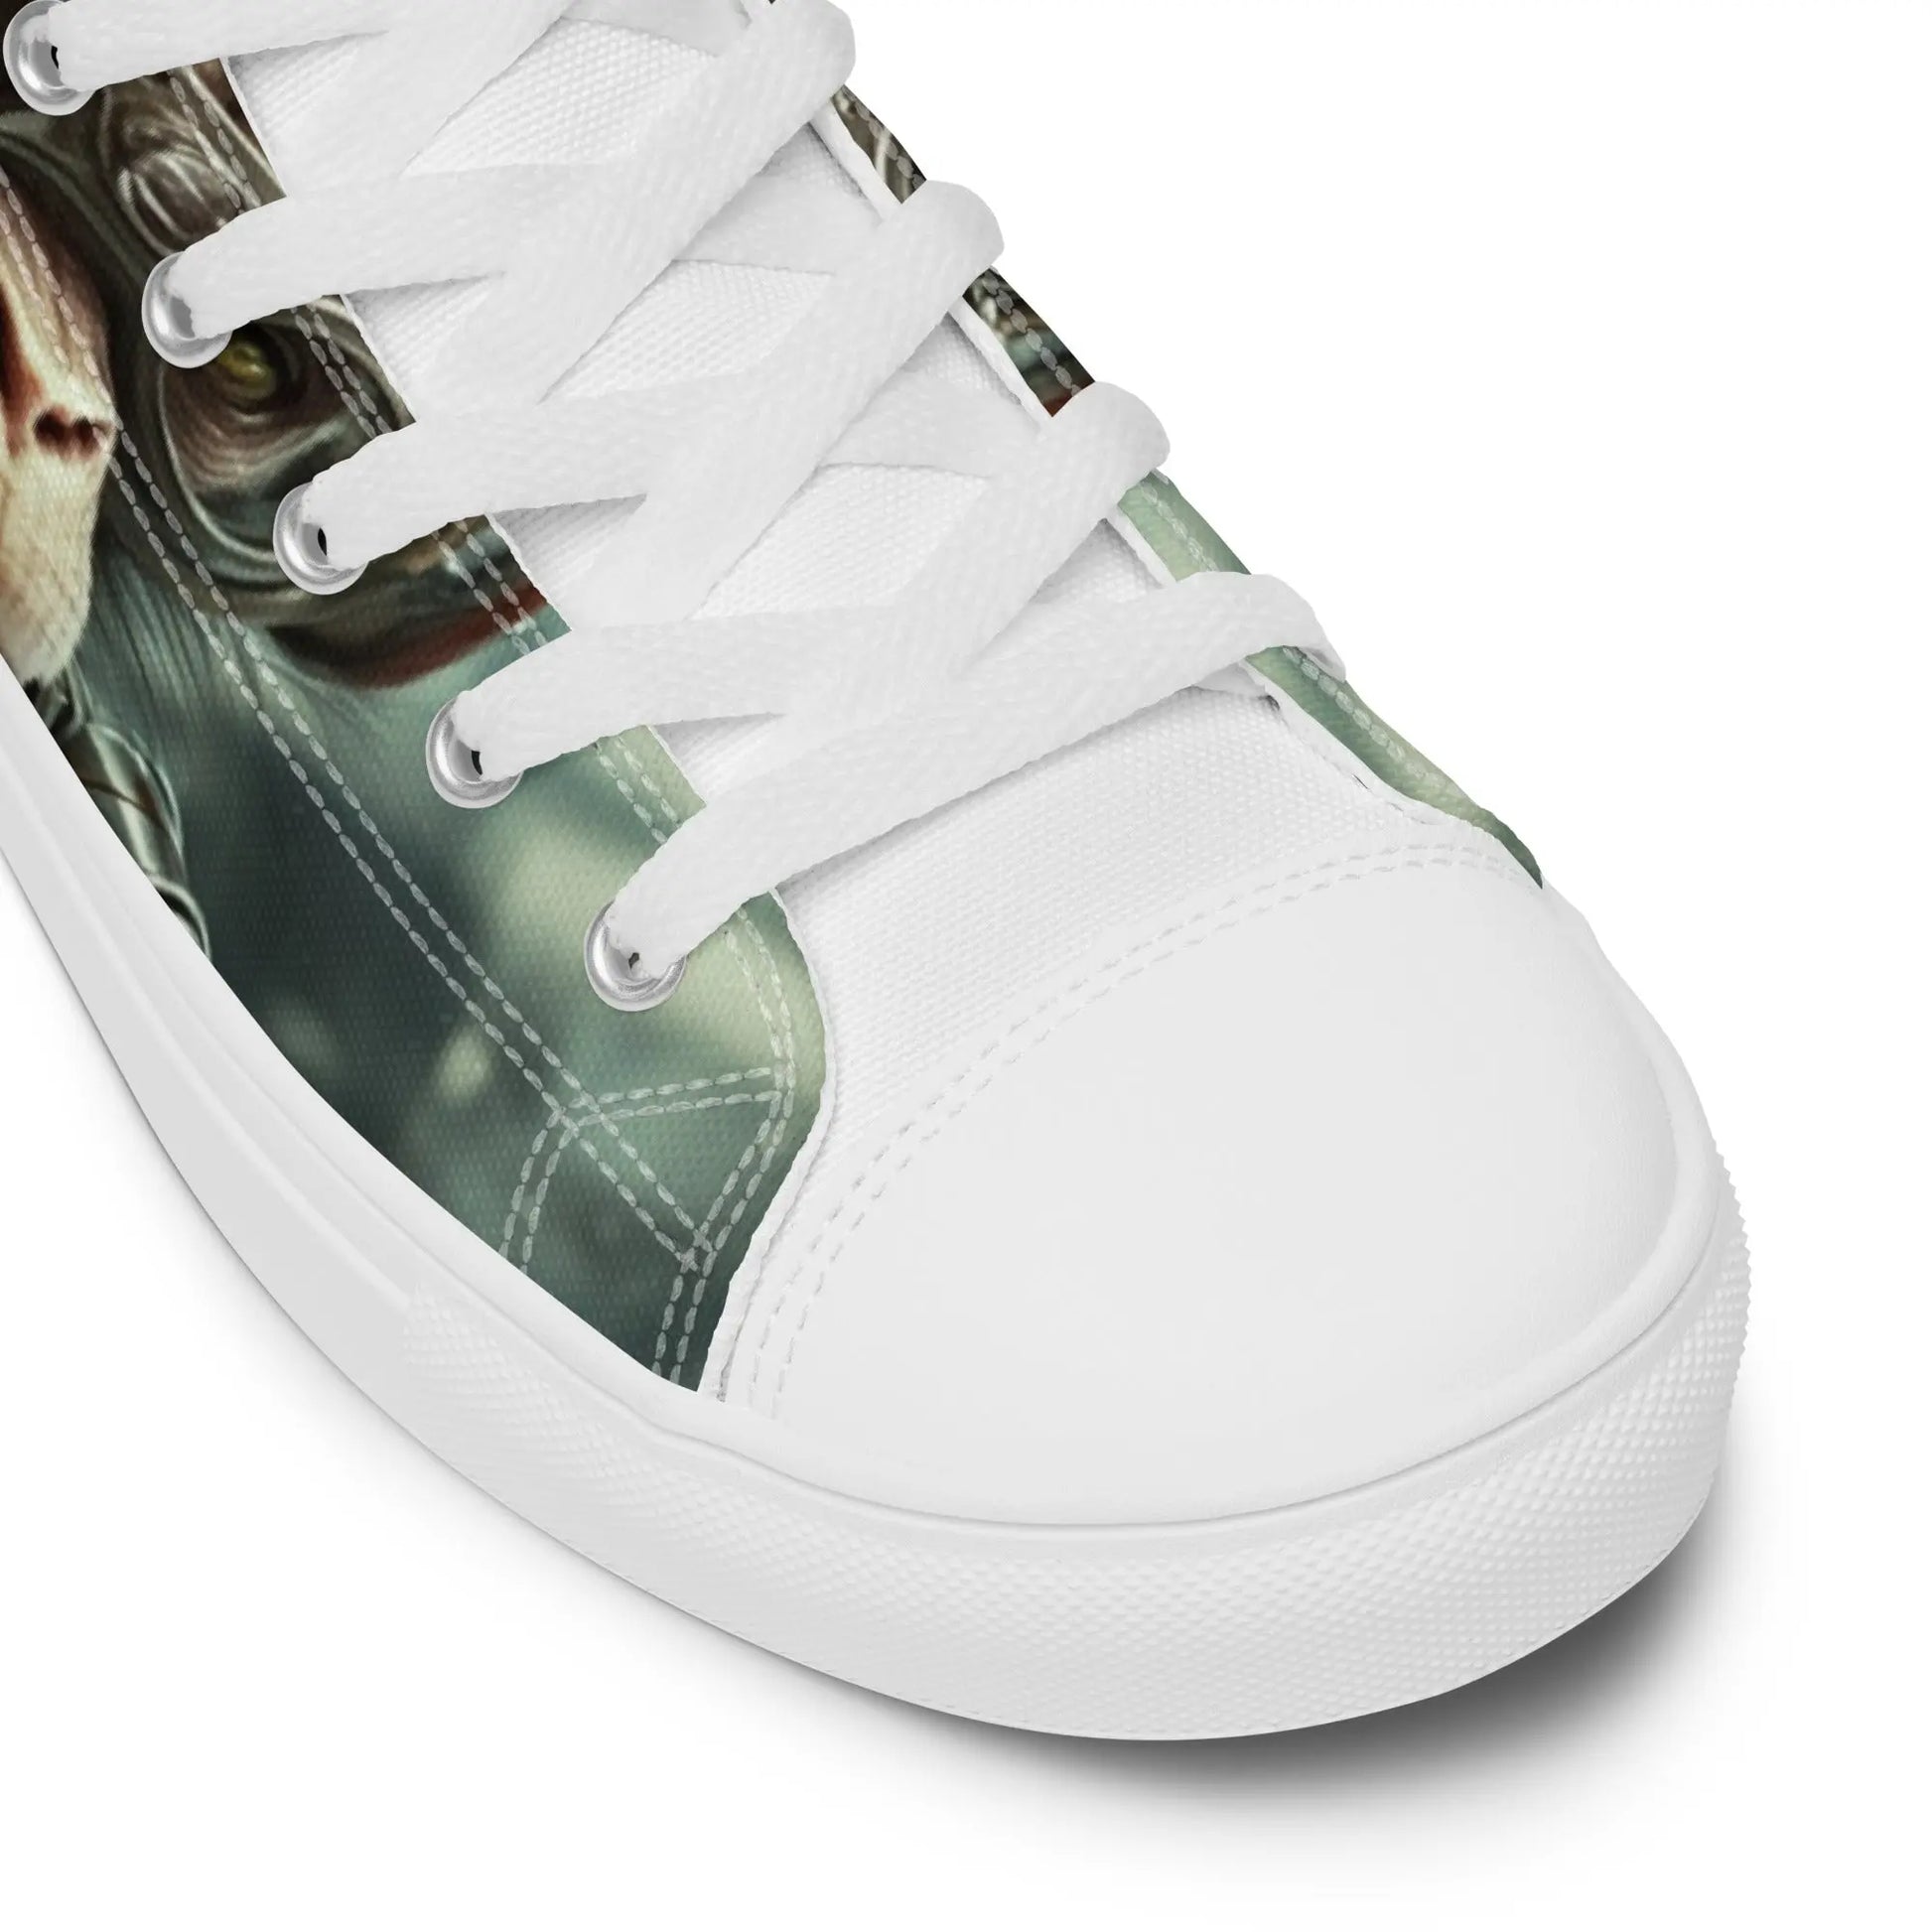 CyberEdge Monkey High Top Sneakers: AI-Engineered, Unisex, Perfect Blend of Edgy and Cool, Durable, Comfortable, Futuristic-Inspired Design Kinetic Footwear